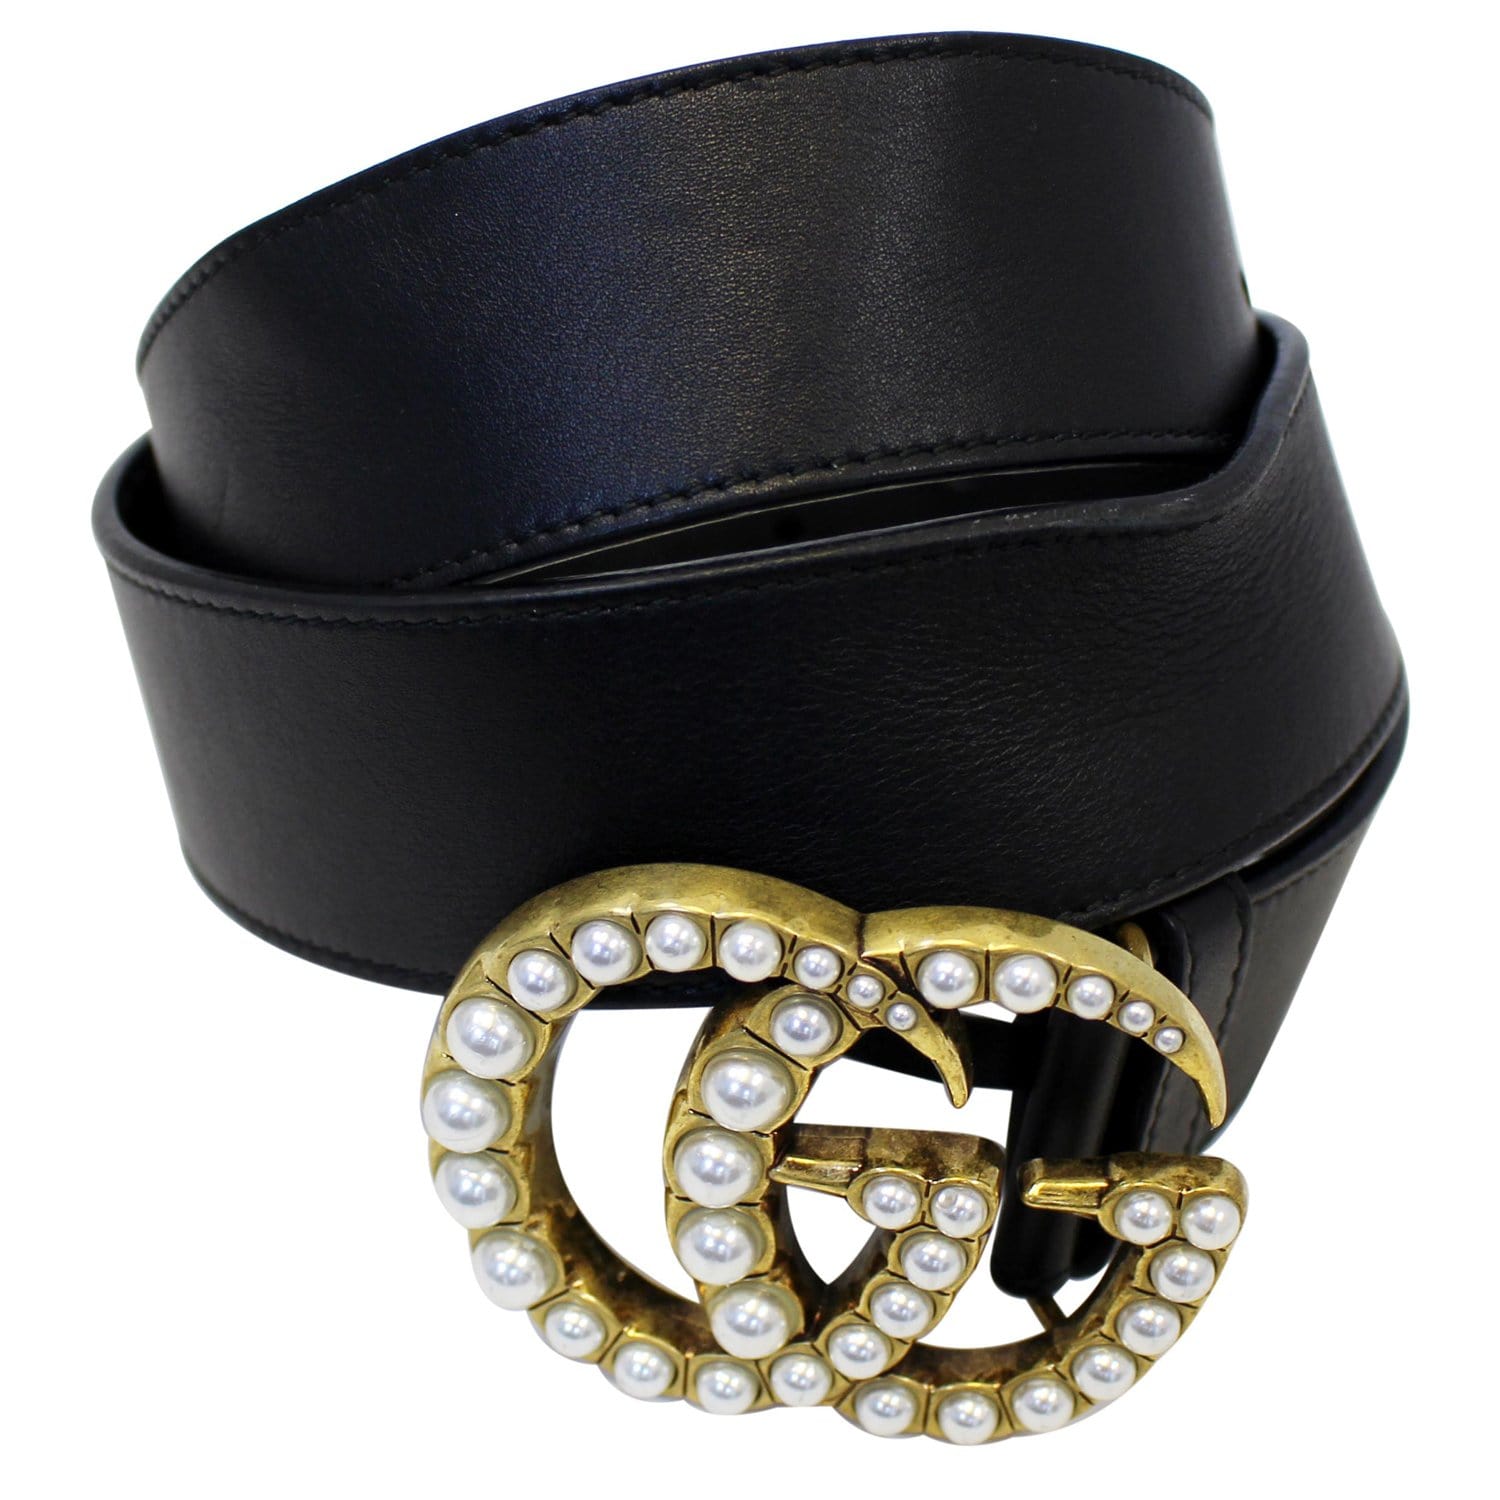 leather belt with pearl double g